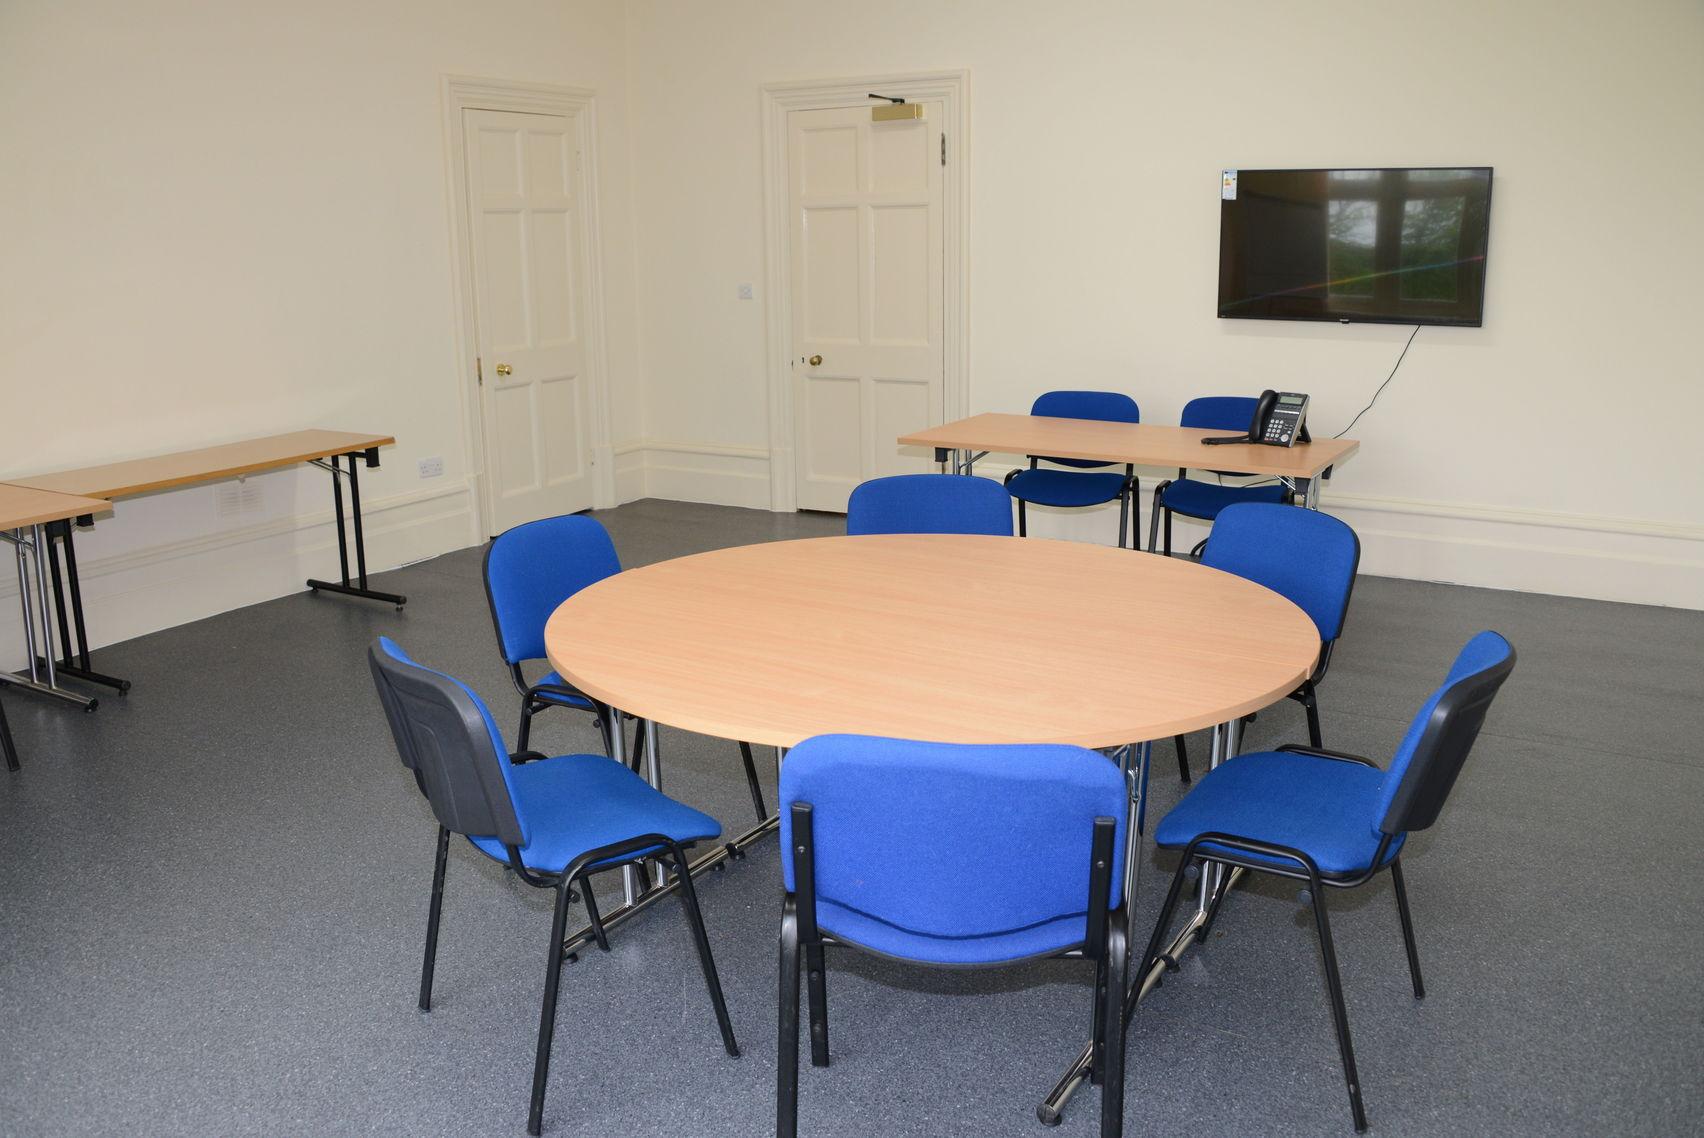 Battersea Dogs And Cats Home - Old Windsor, Meeting Room photo #1